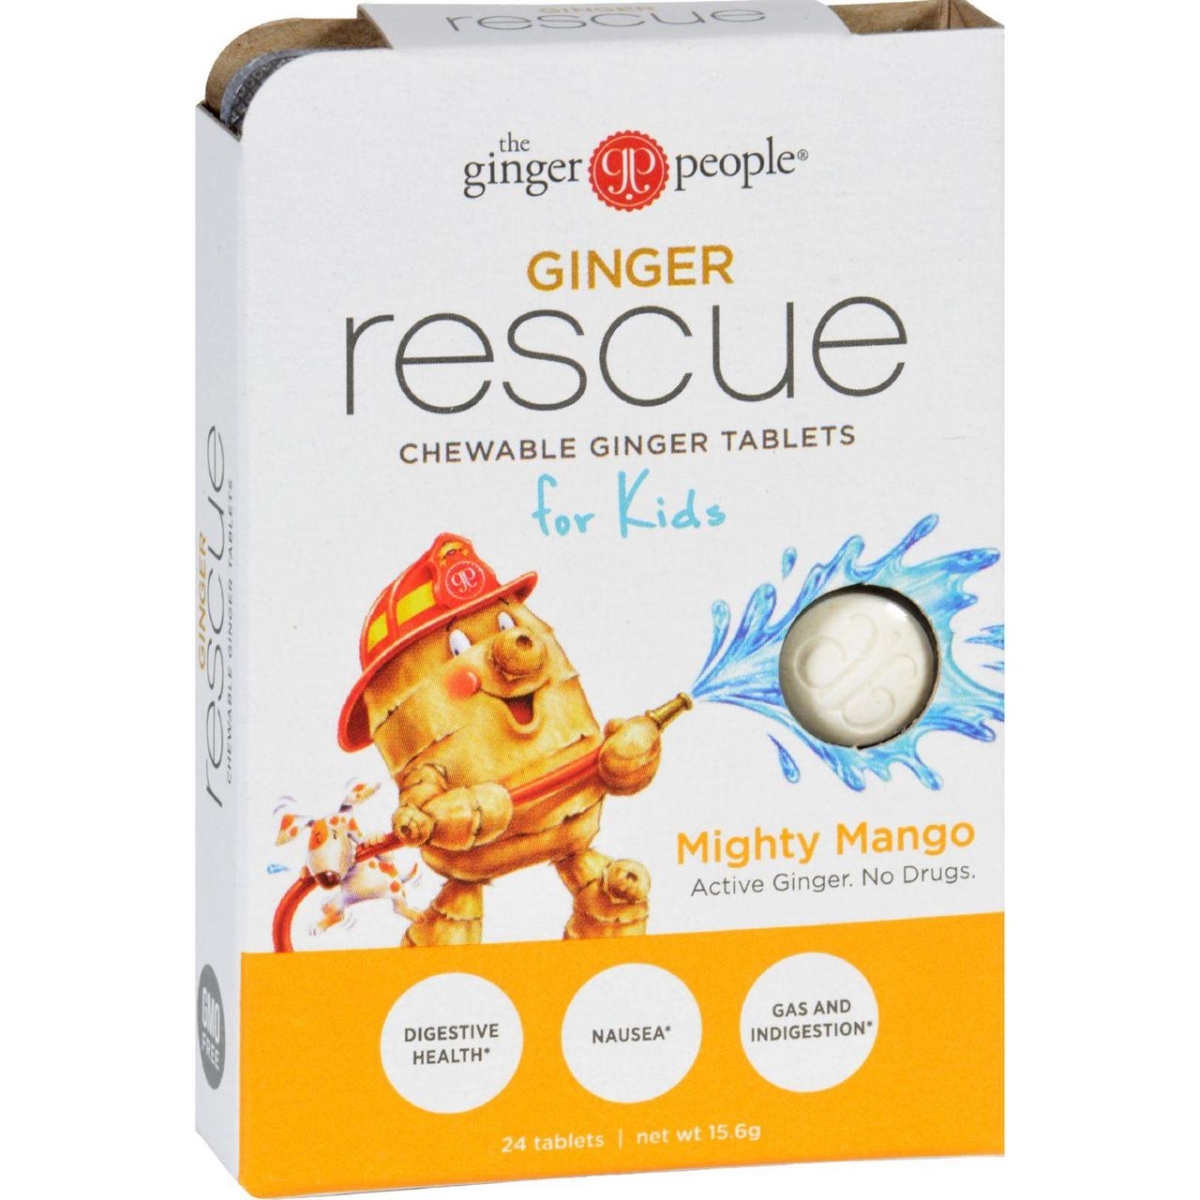 Ginger People Hg1751635 Ginger Rescue For Kids Mighty Mango, 24 Chewable Tablets - Case Of 10